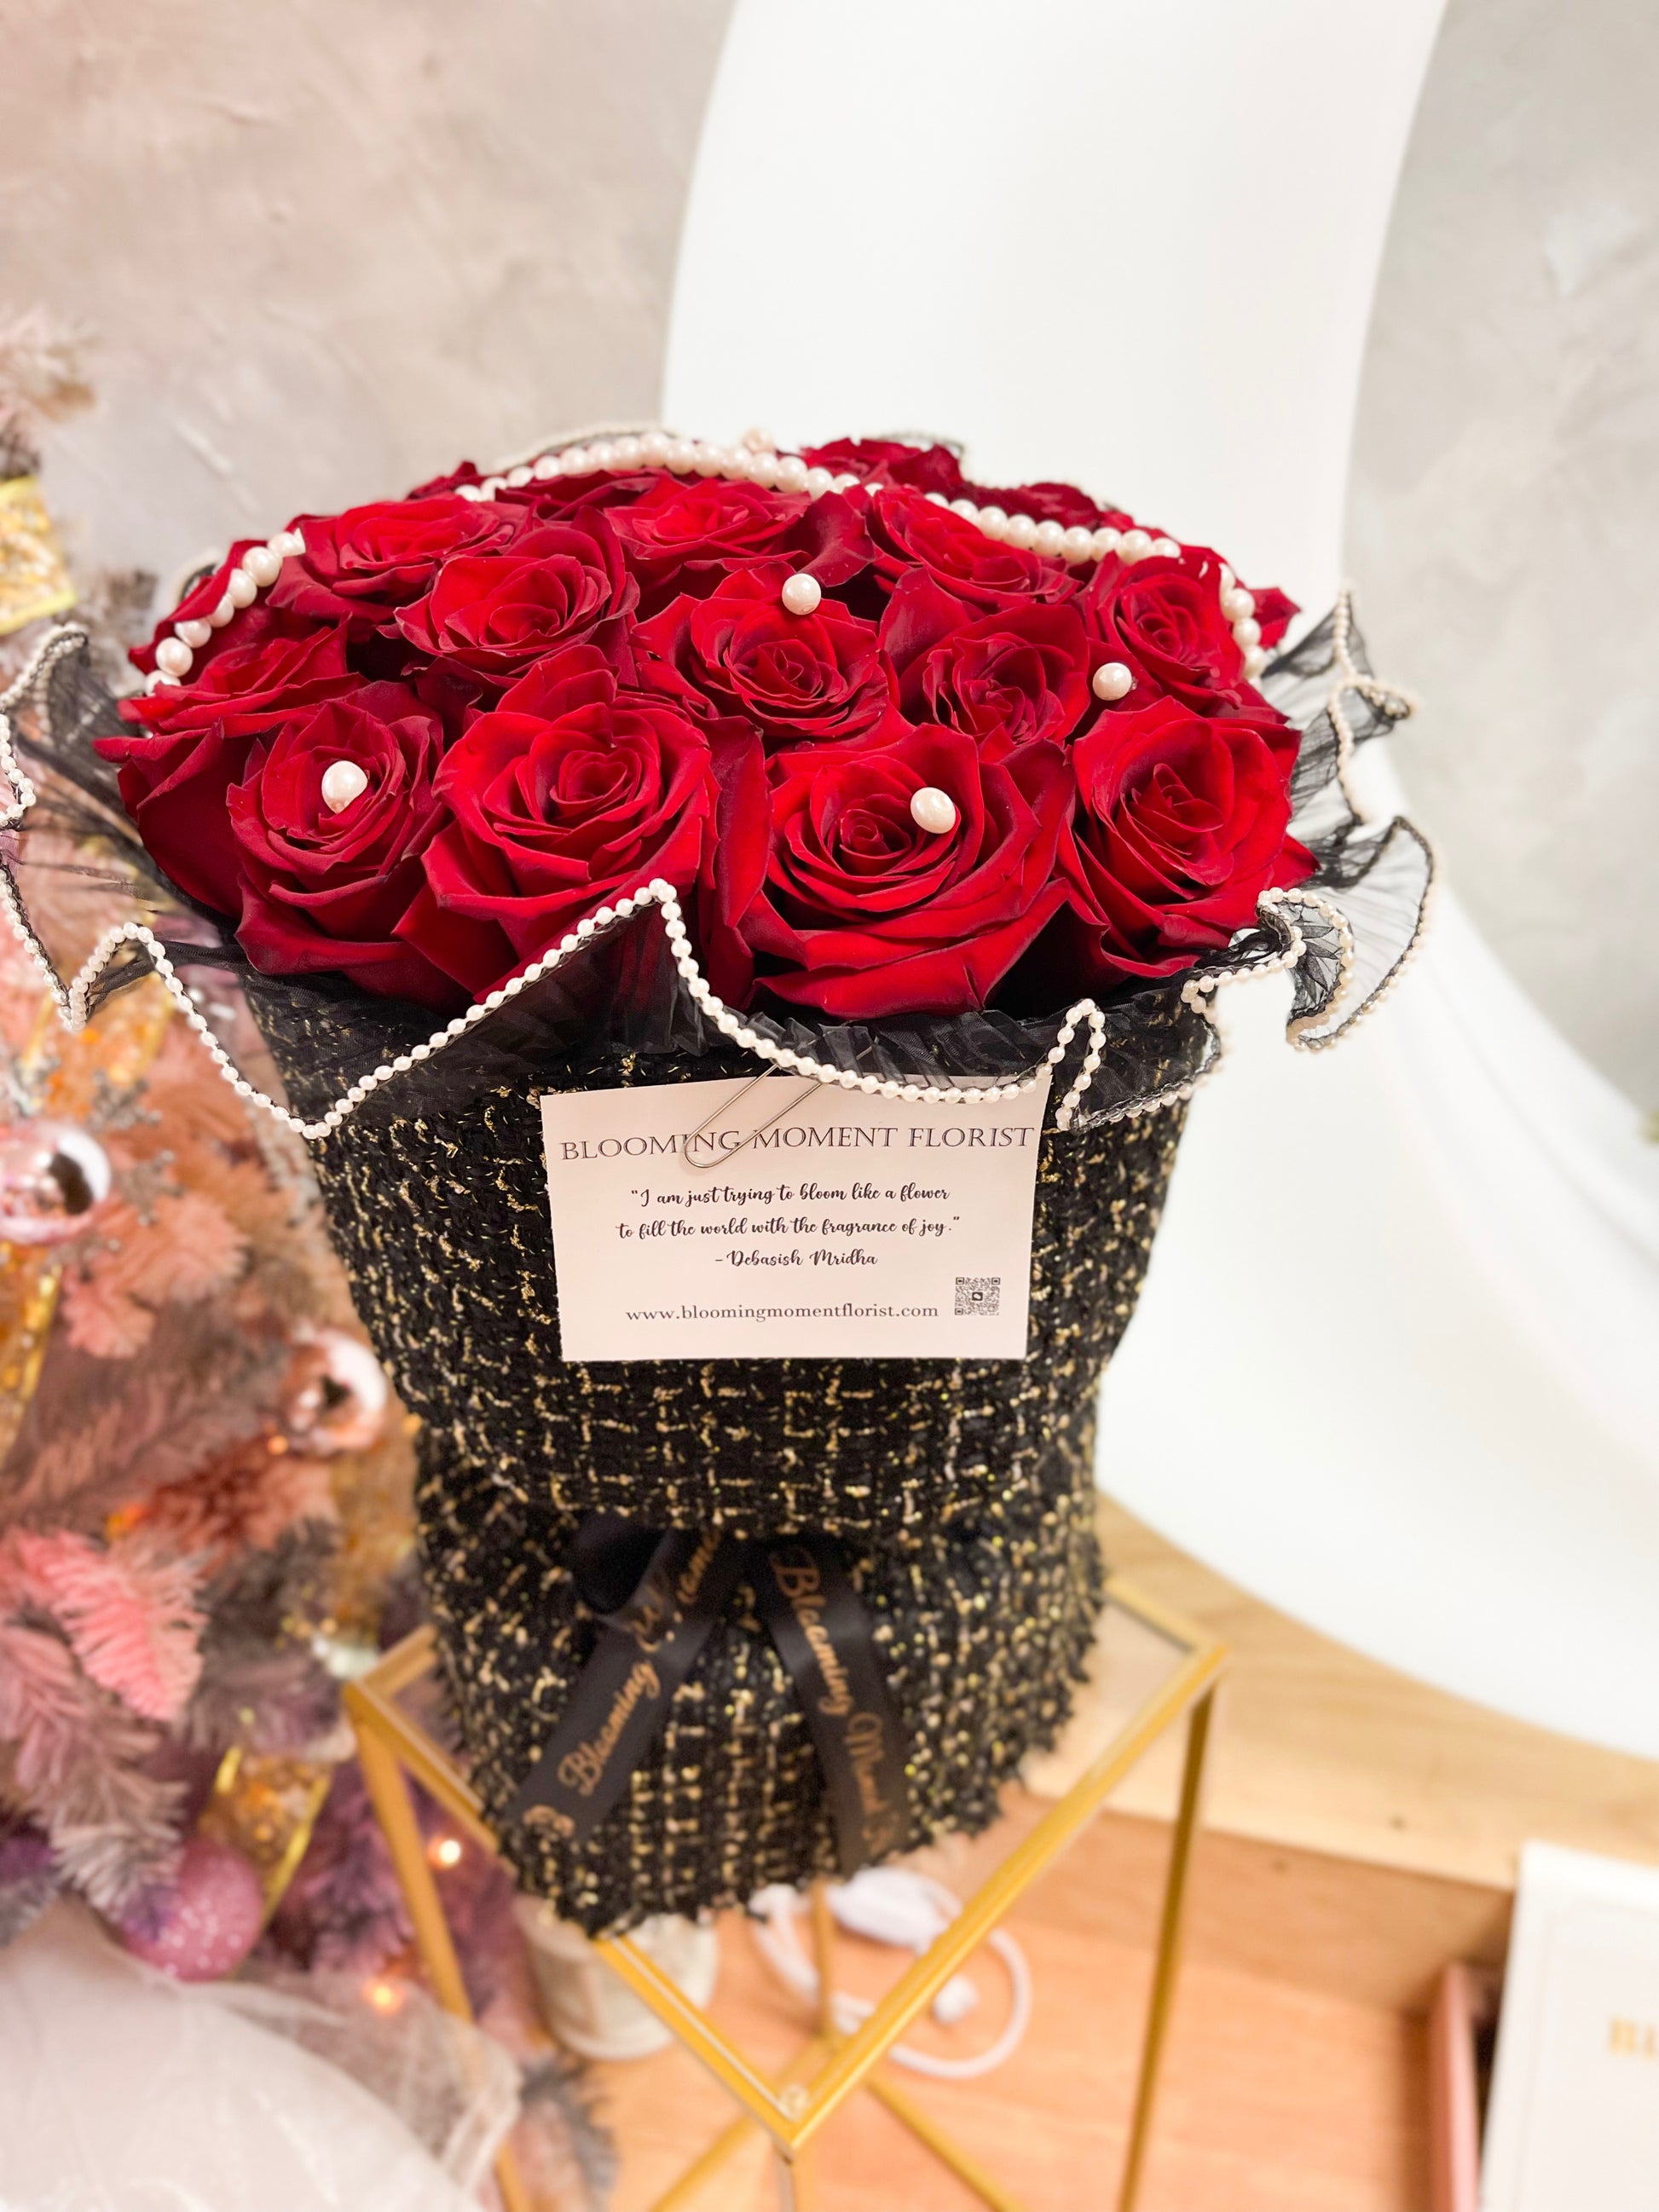 Chanel Inspired Elegant Red Roses bouquet - Blooming